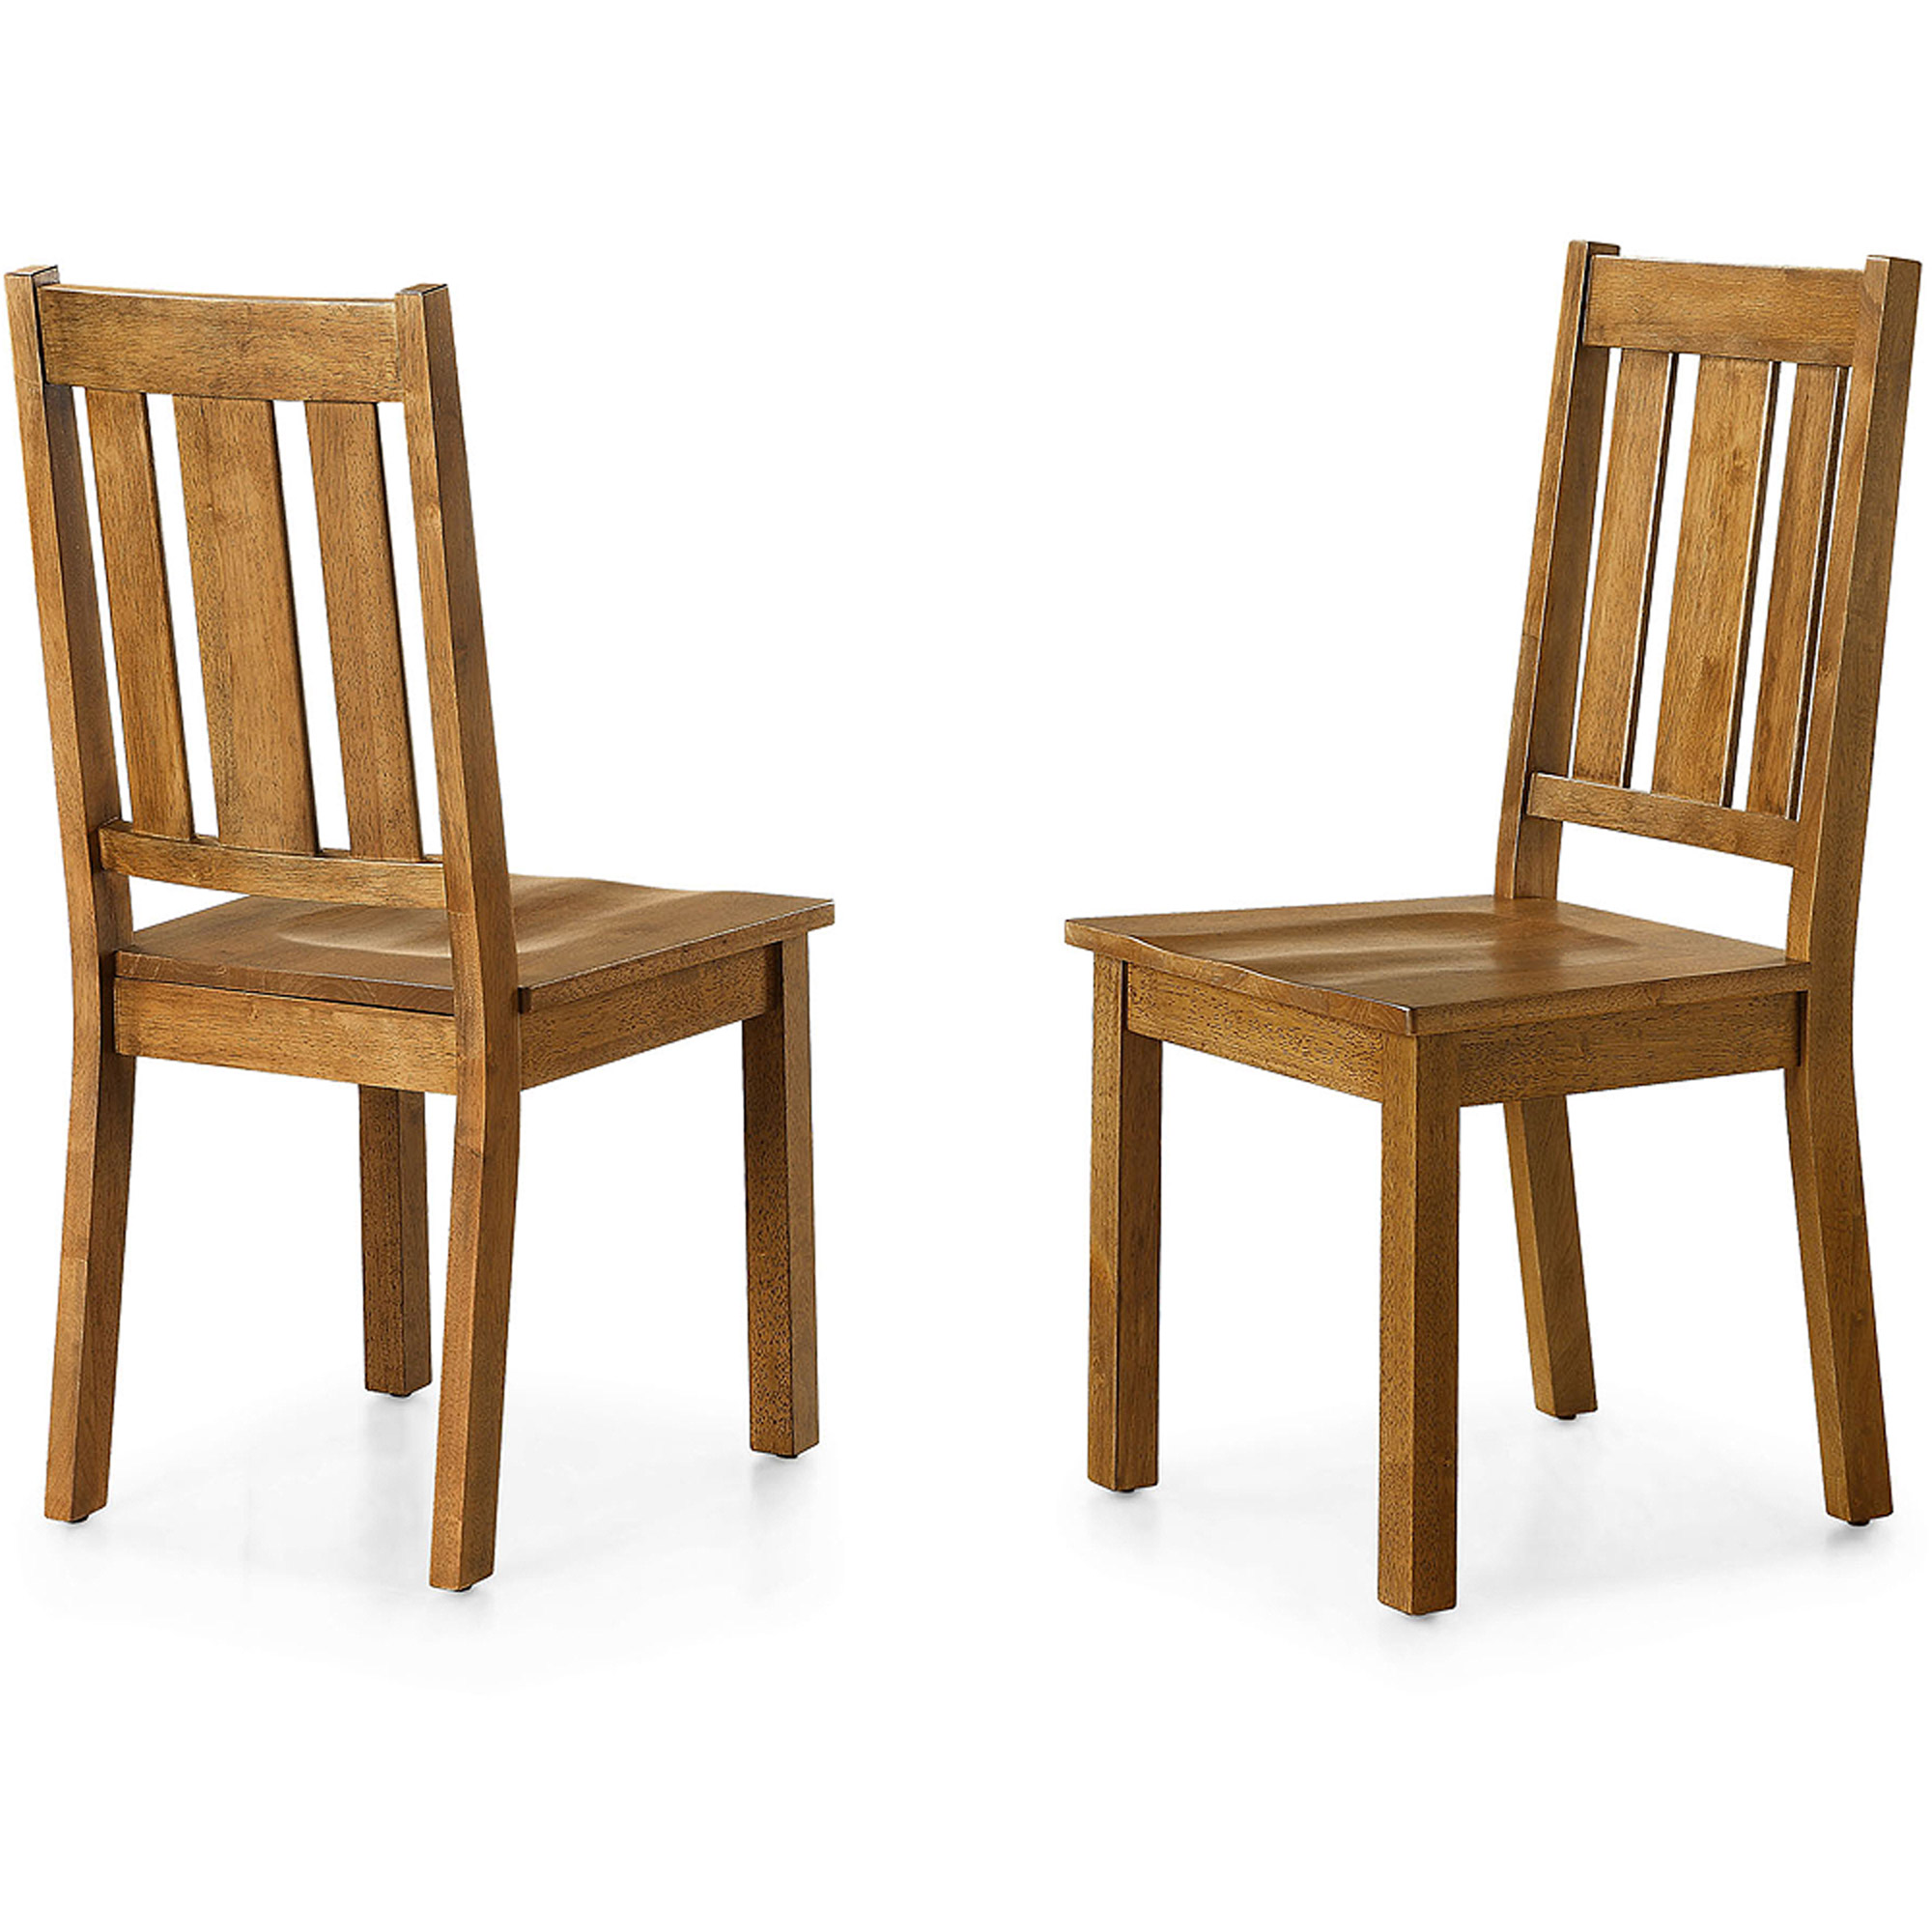 Better Homes and Gardens Bankston Dining Chair, Set of 2, Honey - image 1 of 6